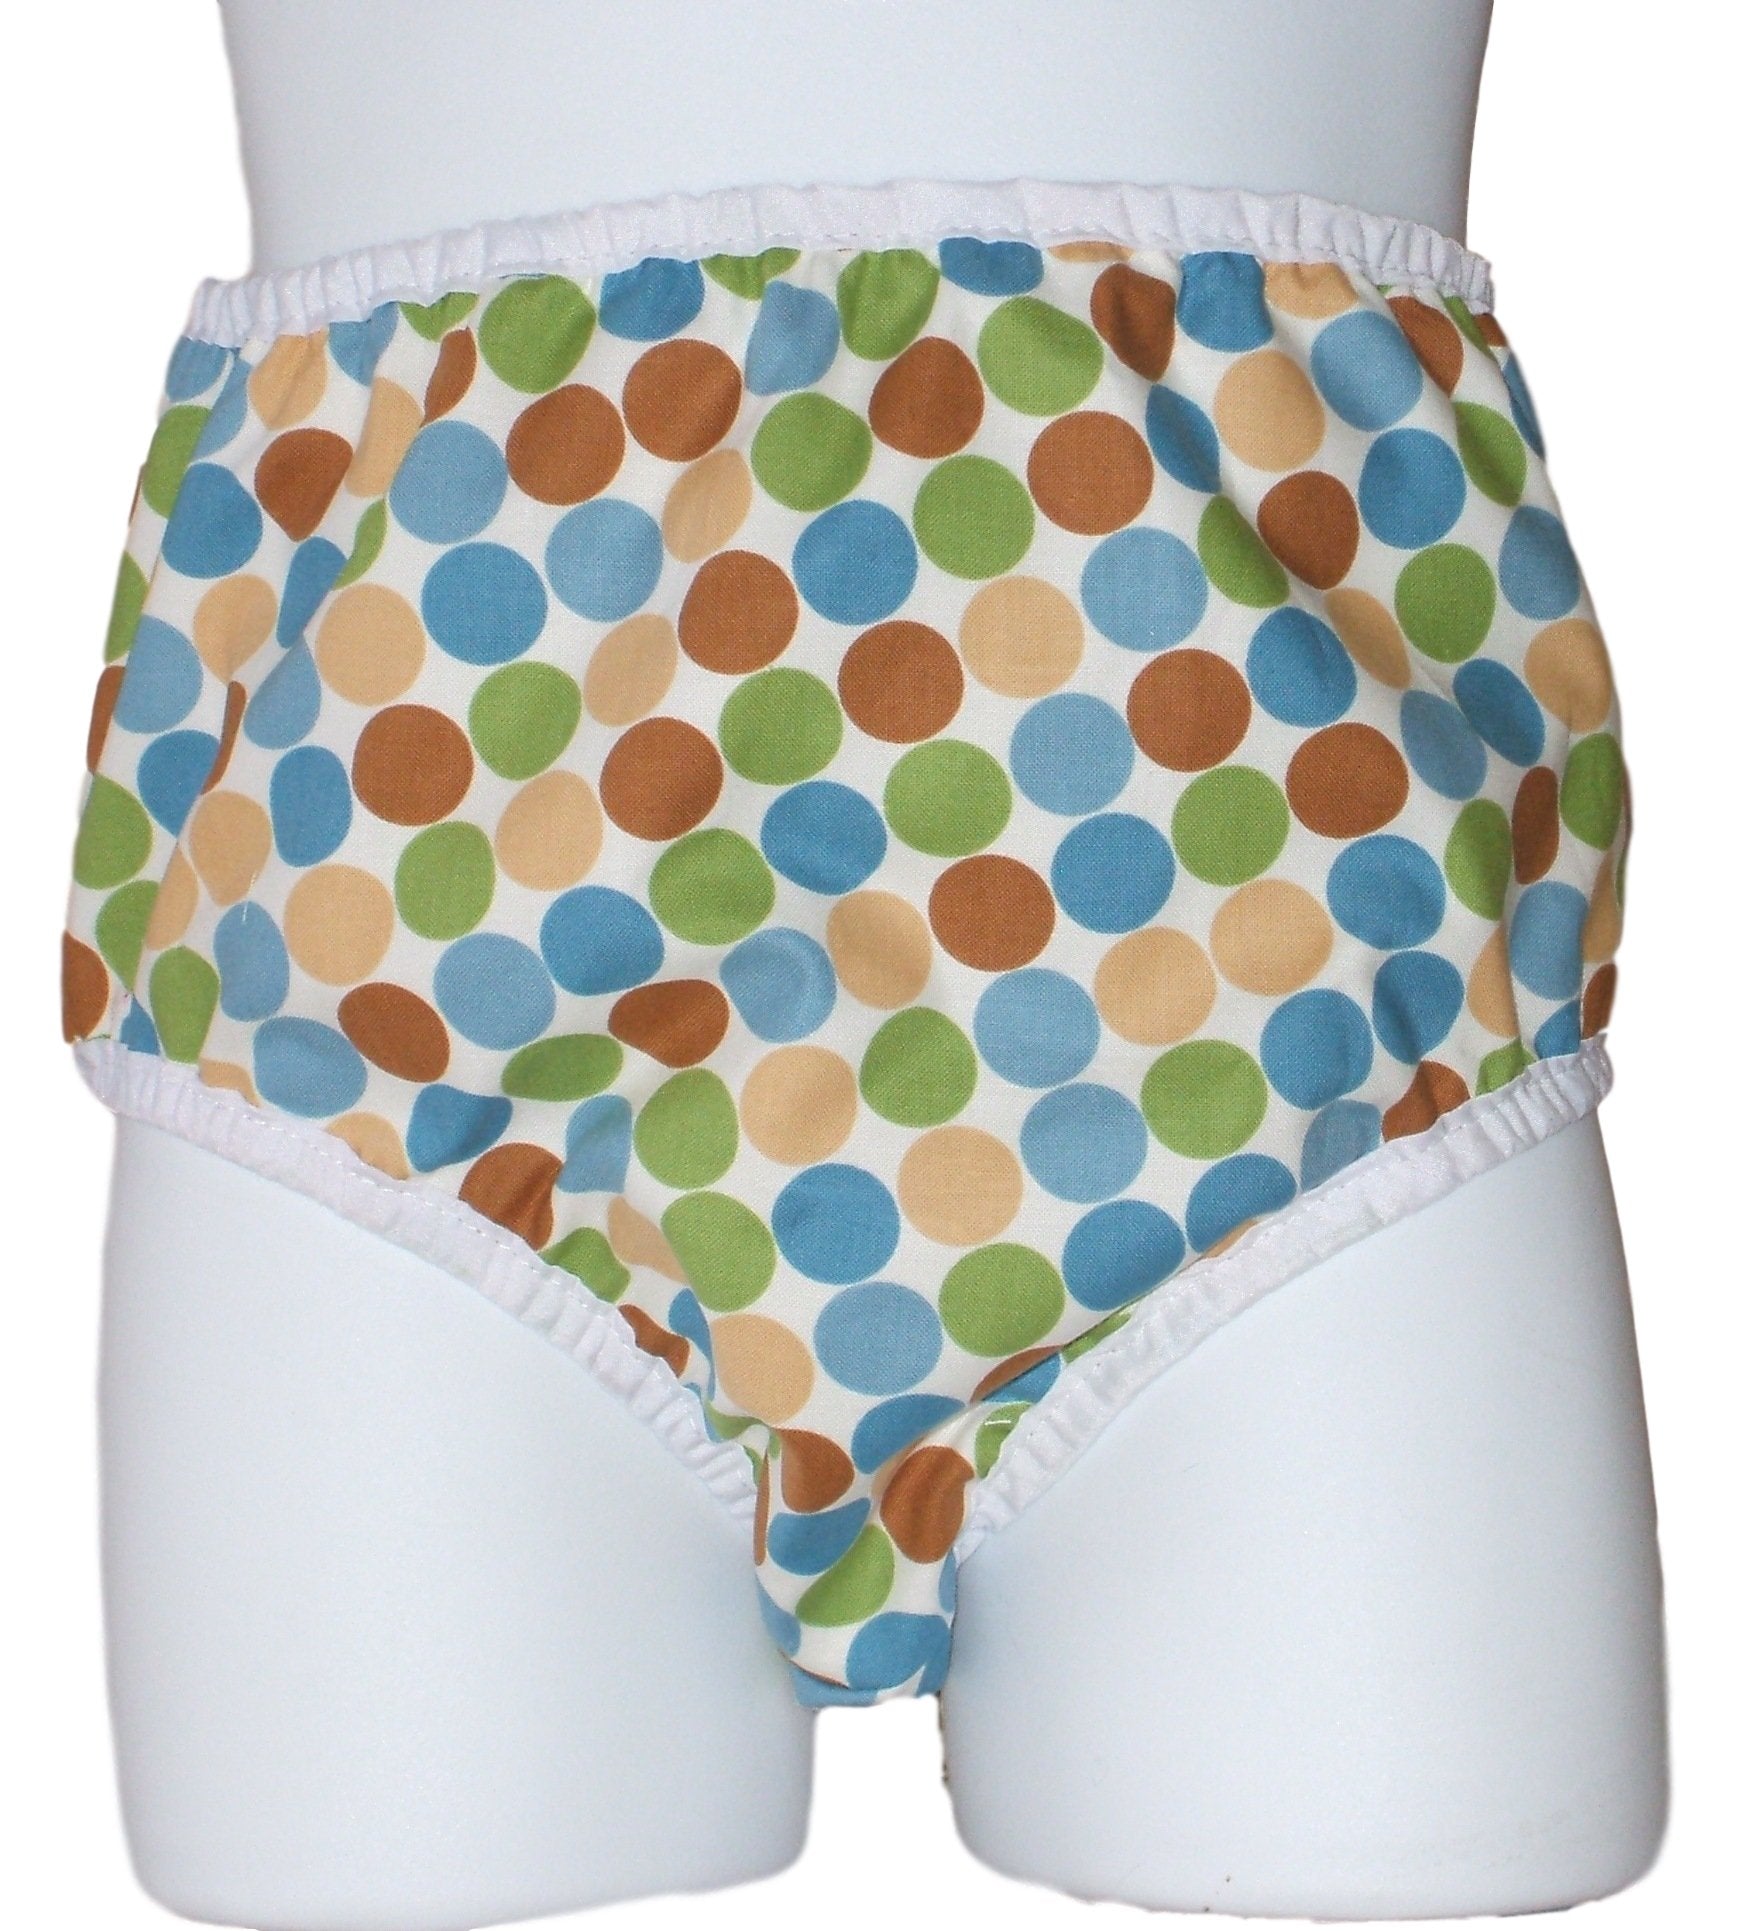 GABBY'S INFANT POOL PANT – My Lil' Miracle